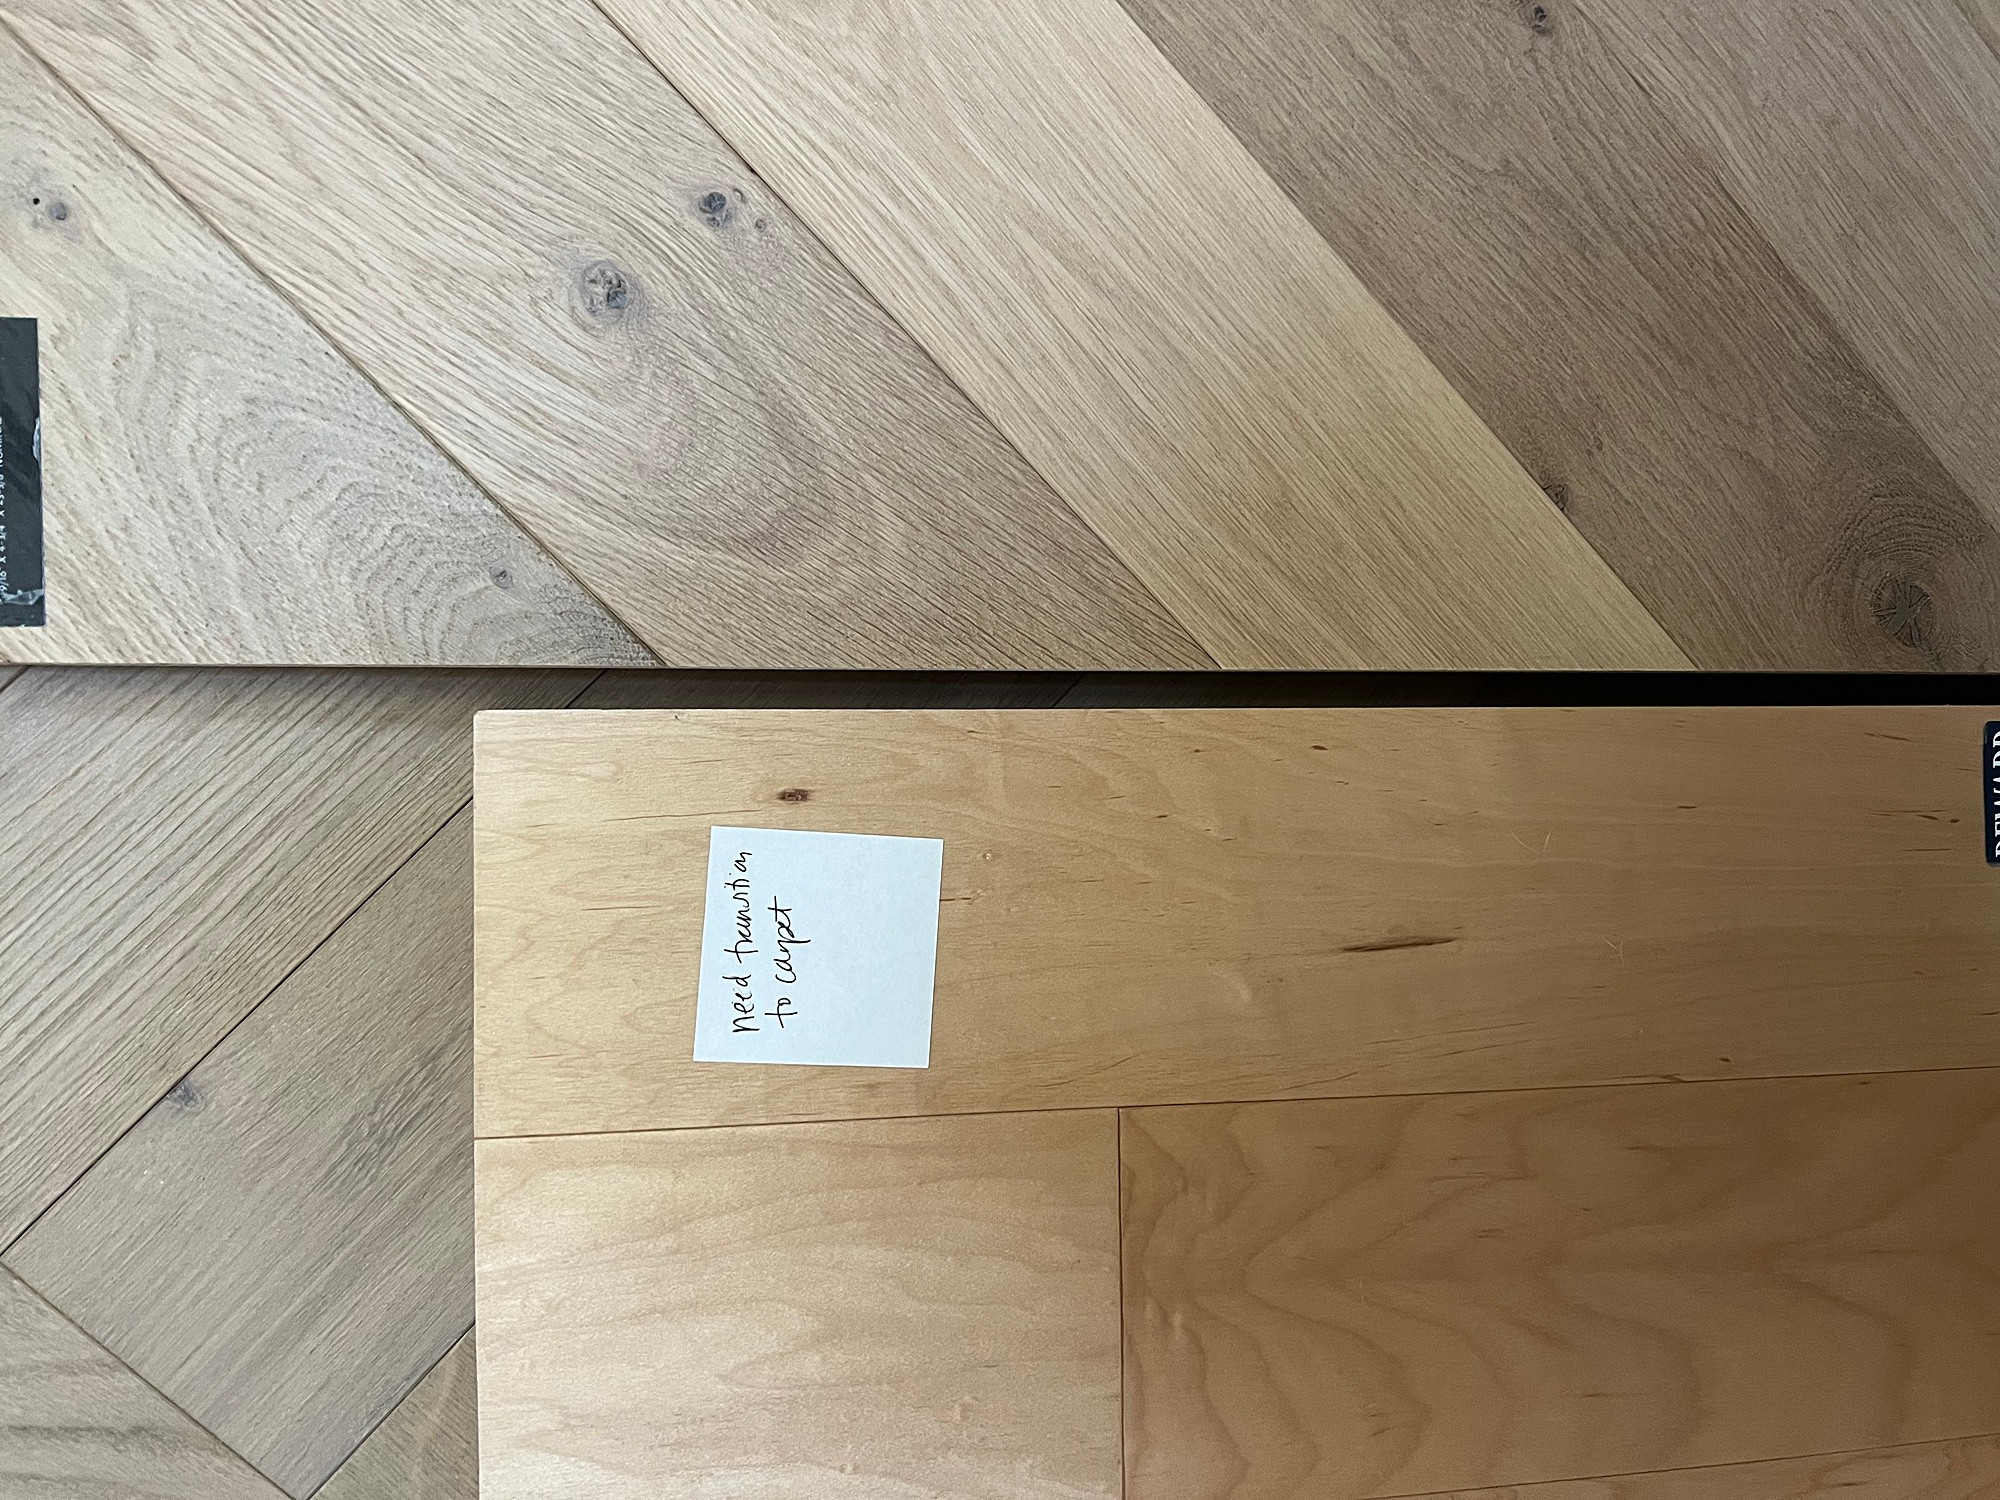 about engineered and Hardwood floors and oak and maple